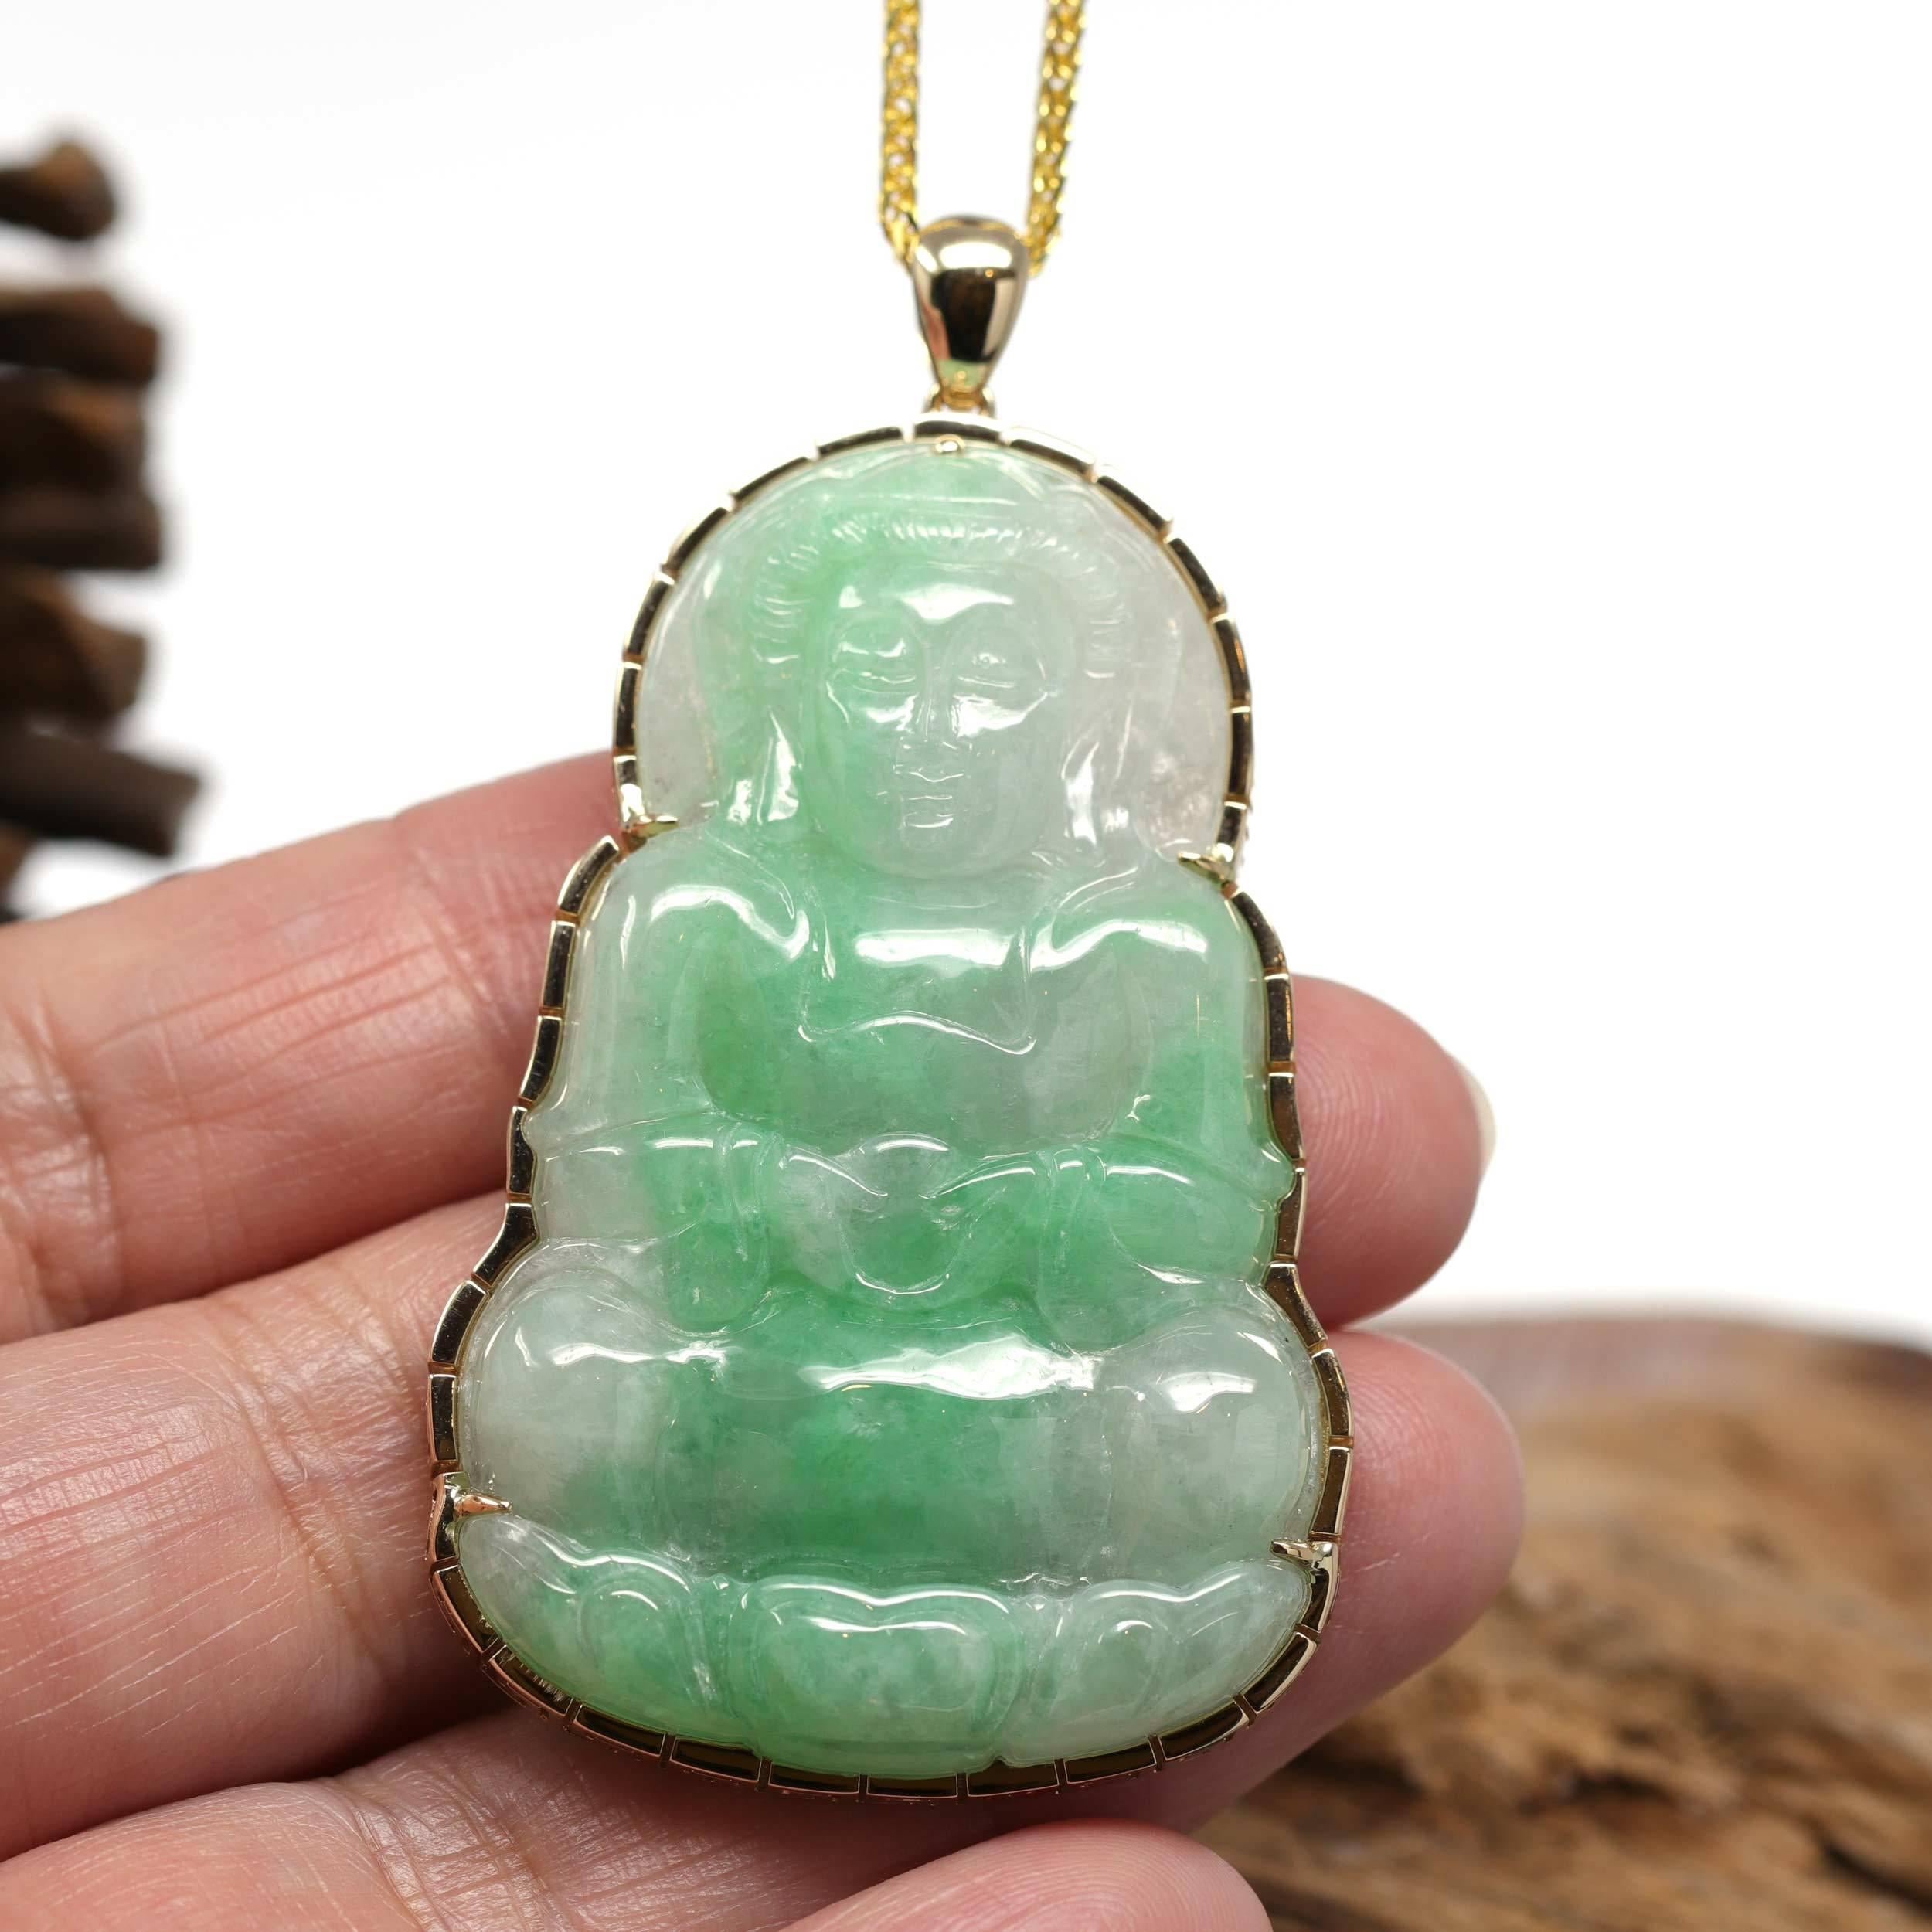 *Design concept--- Made with genuine Burmese jadeite jade. With the goddess sitting on a lotus. The louts symbolize the one who overcame the pain that prevails in the material world and became enlightened, just like the Lotus flower which starts to